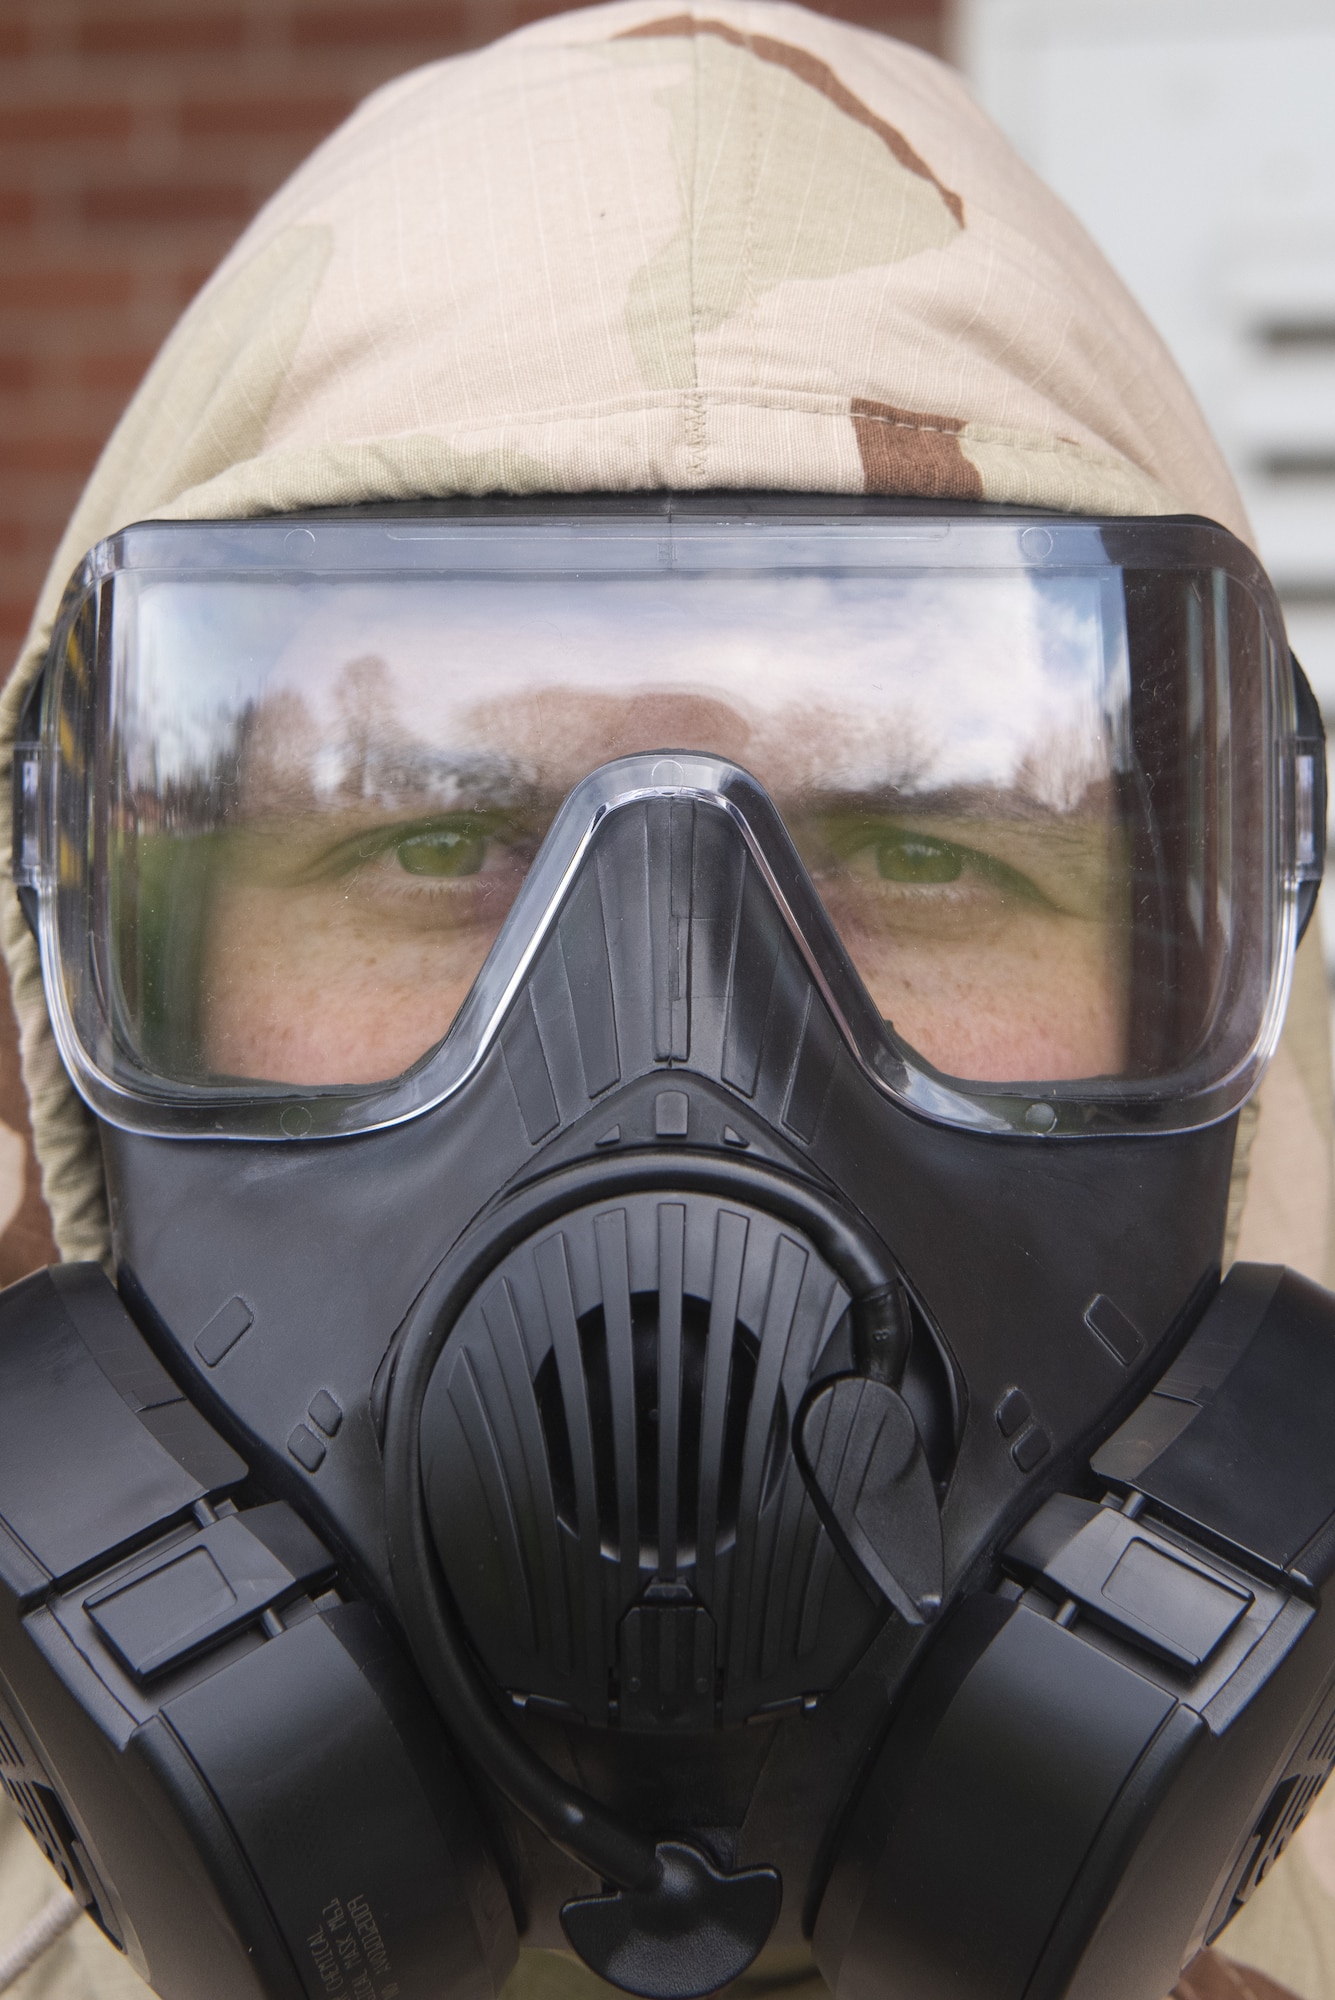 Airman 1st Class Kamron Karnes, 100th Maintenance Squadron Aerospace Ground Equipment apprentice, poses for a photo in his M50 gas mask March 17, 2020, at RAF Mildenhall, England. Emergency management Airmen are responsible for ensuring Airmen like Karnes have the skills needed to operate their chemical, biological, radiological and nuclear protective gear. (U.S. Air Force photo by Airman 1st Class Joseph Barron)